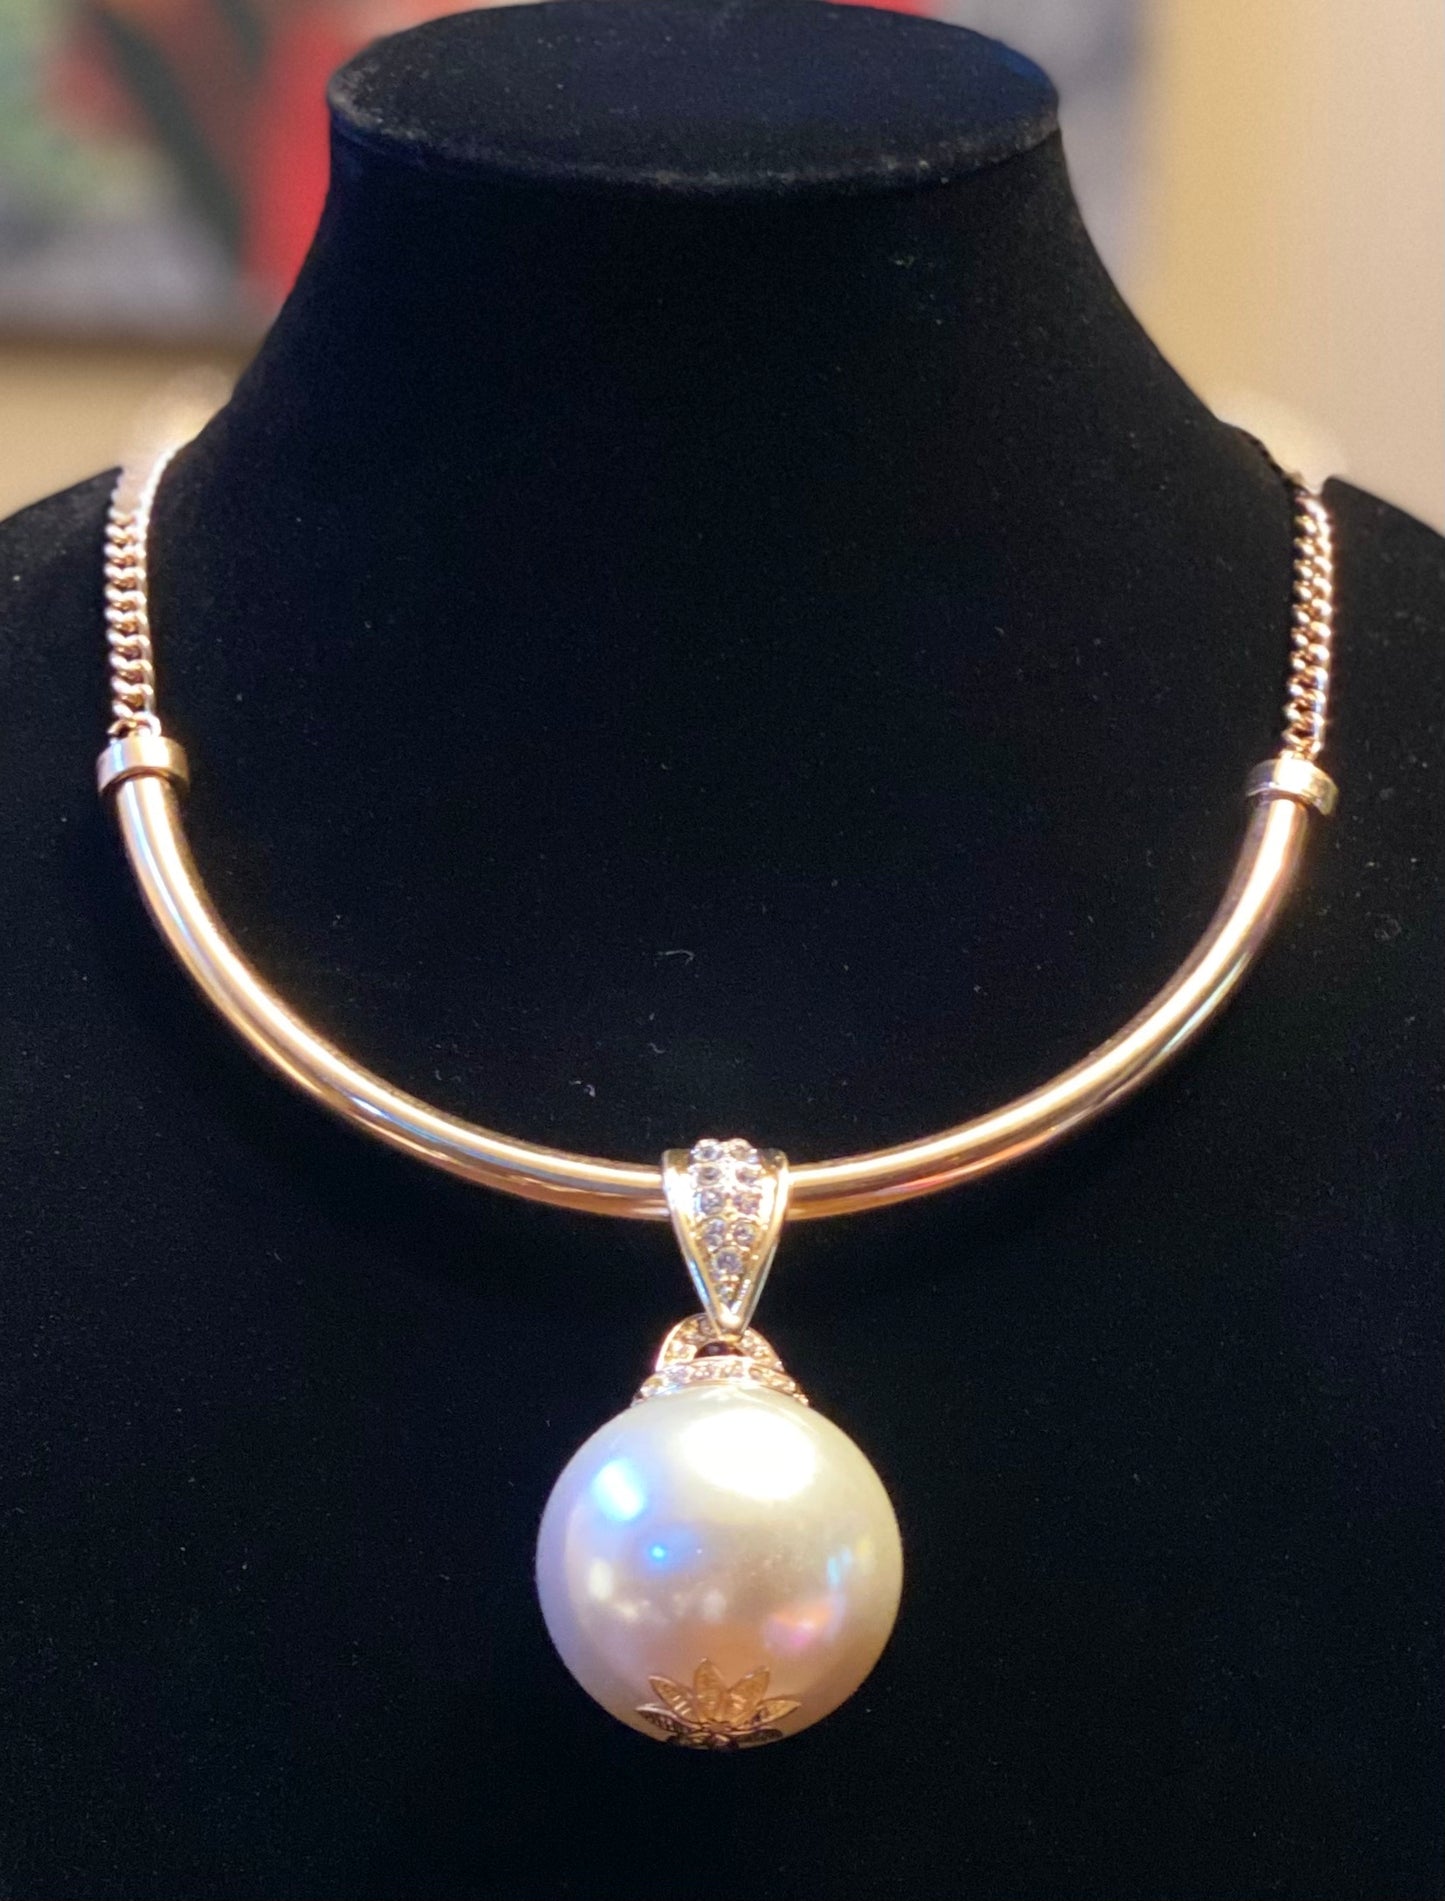 Ladies' Collar Necklace with Large Pearl Pendant